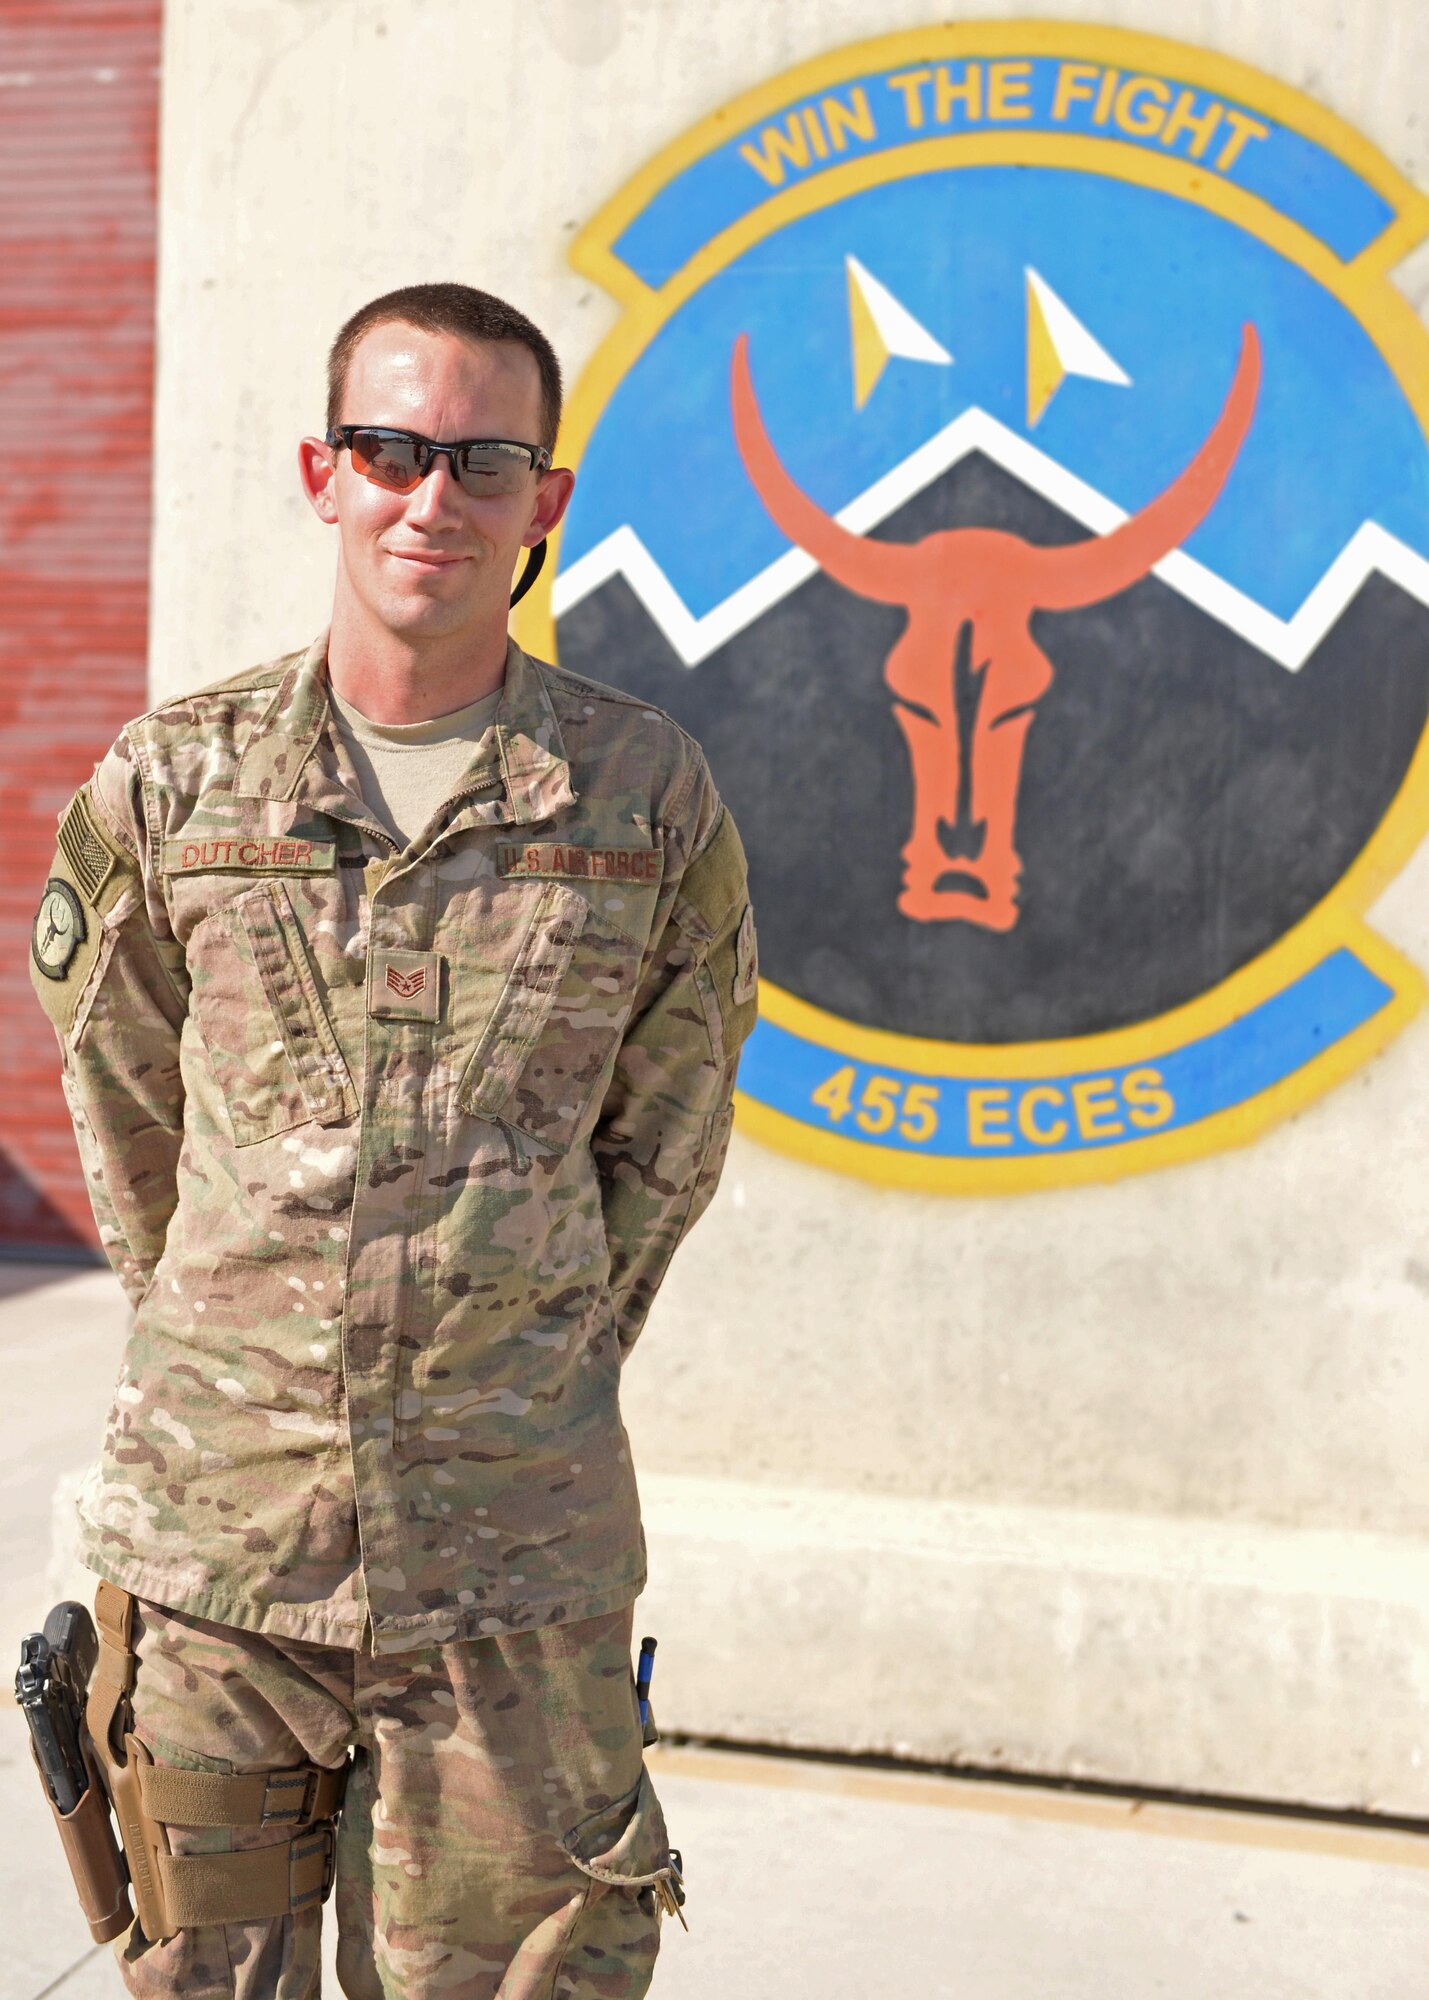 U.S. Air Force Staff Sgt. Russell Dutcher, 455th Expeditionary Civil Engineer Squadron, HVAC technician, poses for a photo June 30, 2015, at Bagram Airfield, Afghanistan. Dutcher who is part of the 1000s of Hands Project, is responsible for responding to all work orders dealing with AC problems as well as keeping Bagram’s mission equipment such as computers and servers cool. (U.S. Air Force photo by Senior Airman Cierra Presentado/Released)